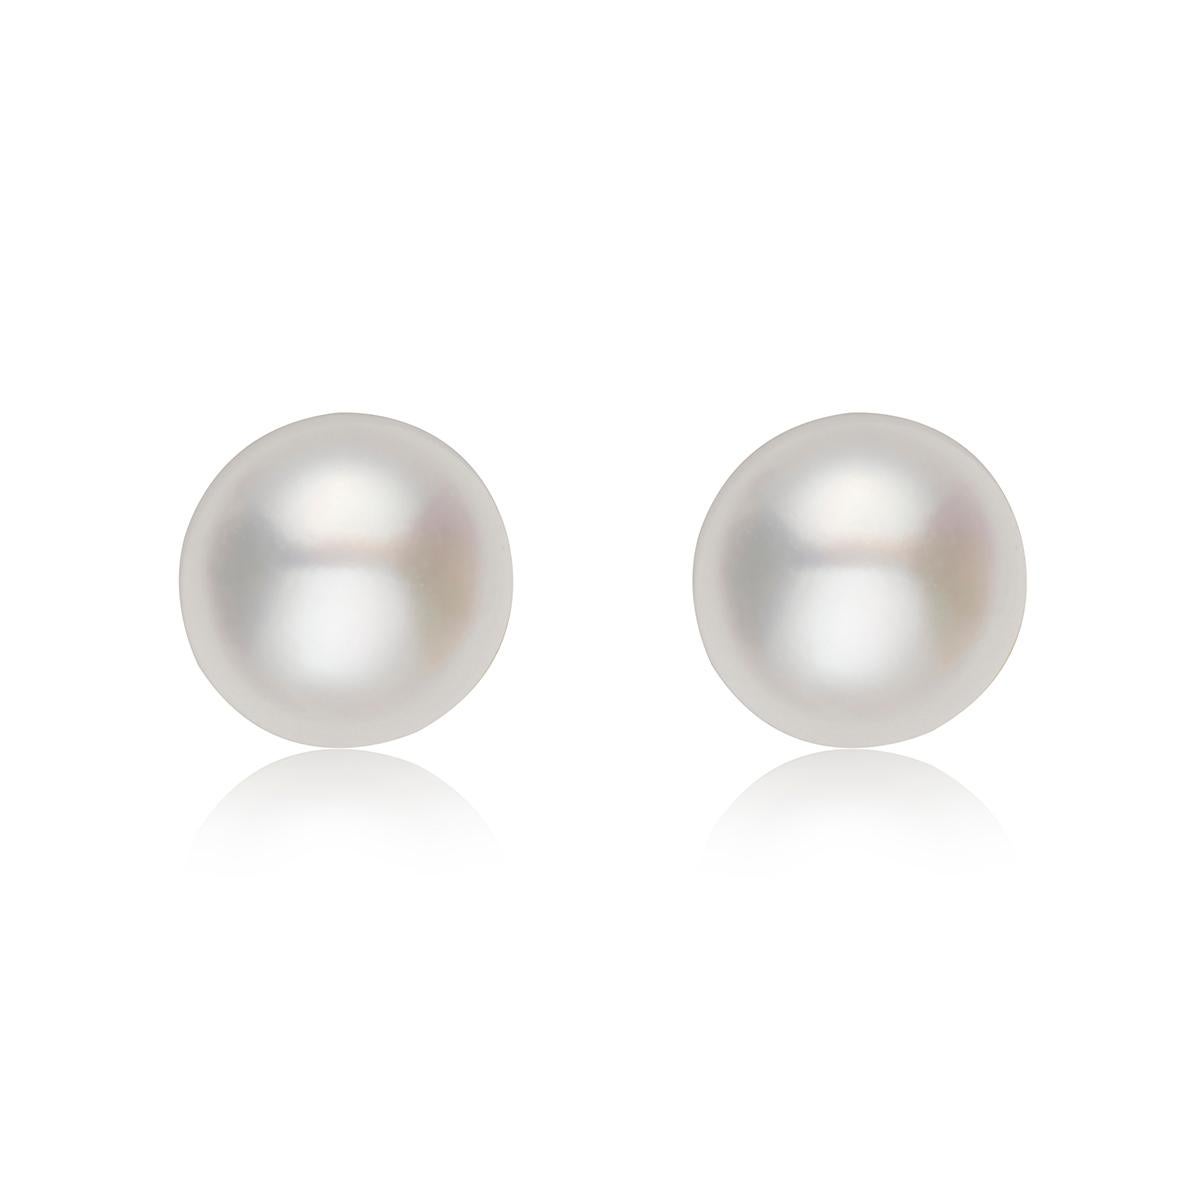 These classic studs feature Freshwater white button pearls, measuring 4-5mm. They are mounted on genuine .925 Sterling Silver. This wardrobe essential serves as the perfect compliment to every outfit.